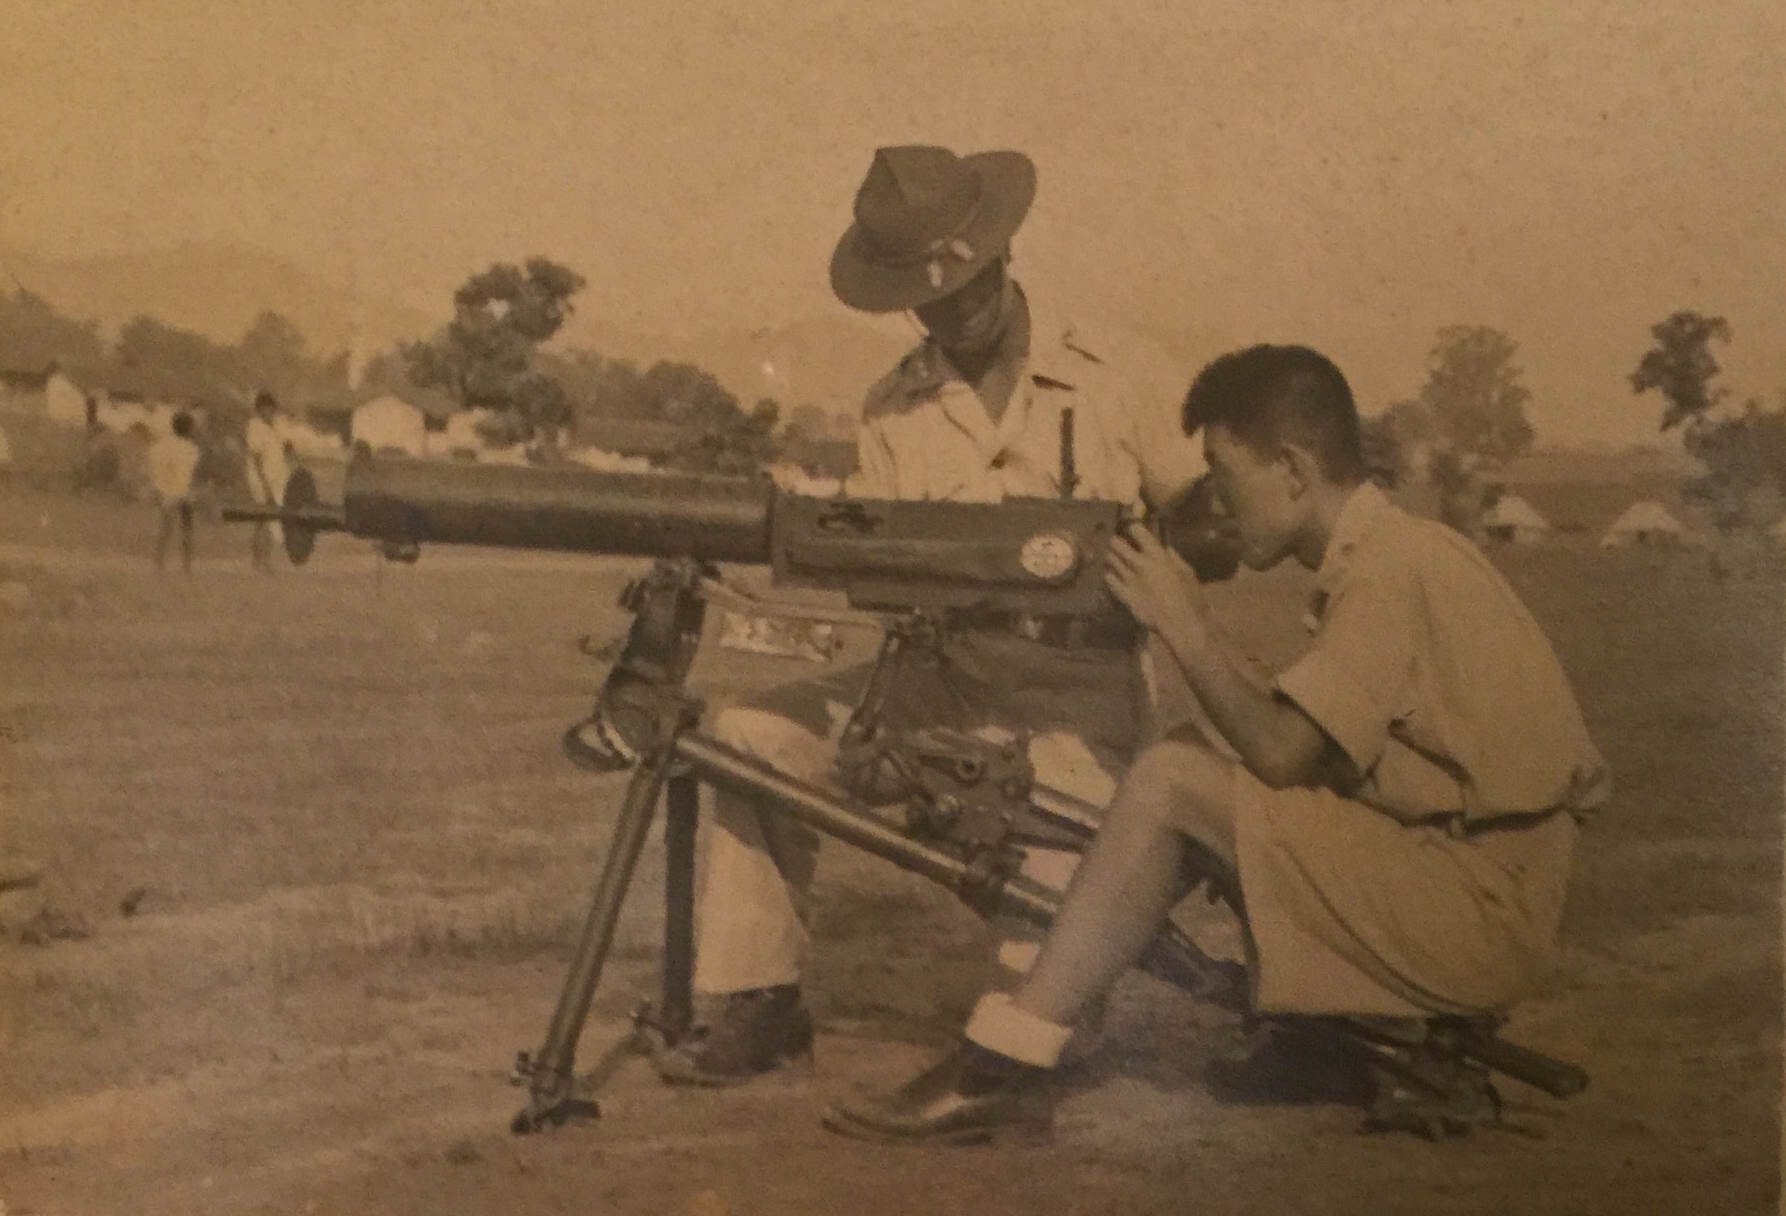 Dad trains a Chinese soldier on a seized Japanese weapon at Ramgarh 1943. If you look closely, you can see a German Swastika on the side.